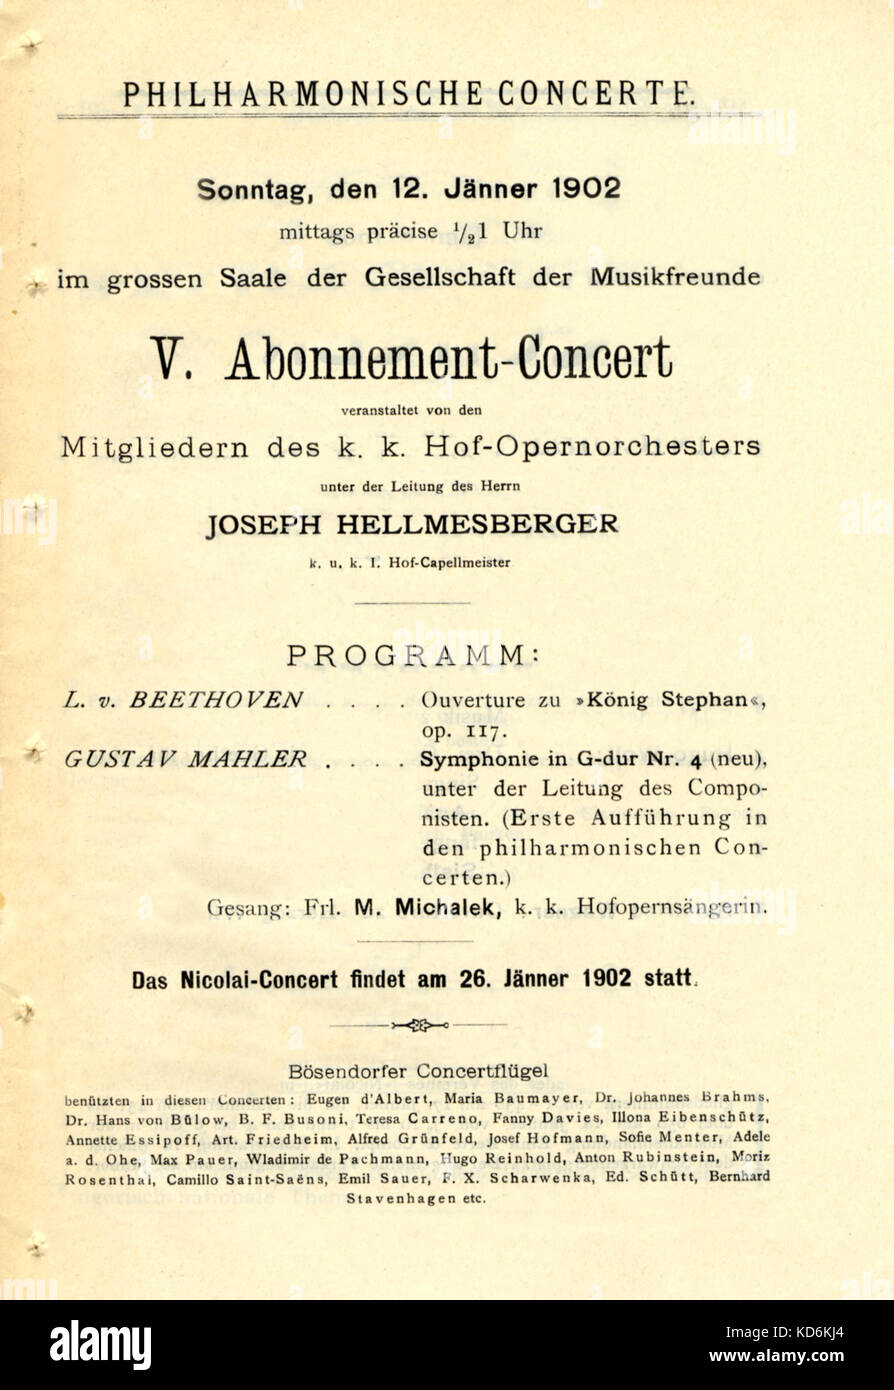 Programme cover for Philharmonische Concerte (Philharmonic Concert) in Grossen Saale of Gesellschaft der Musikfreunde, Vienna on 12th January 1902 for performance of Mahler's 4th Symphony conducted by Joseph Hellmesberger. With M. Michalek singing. Stock Photo